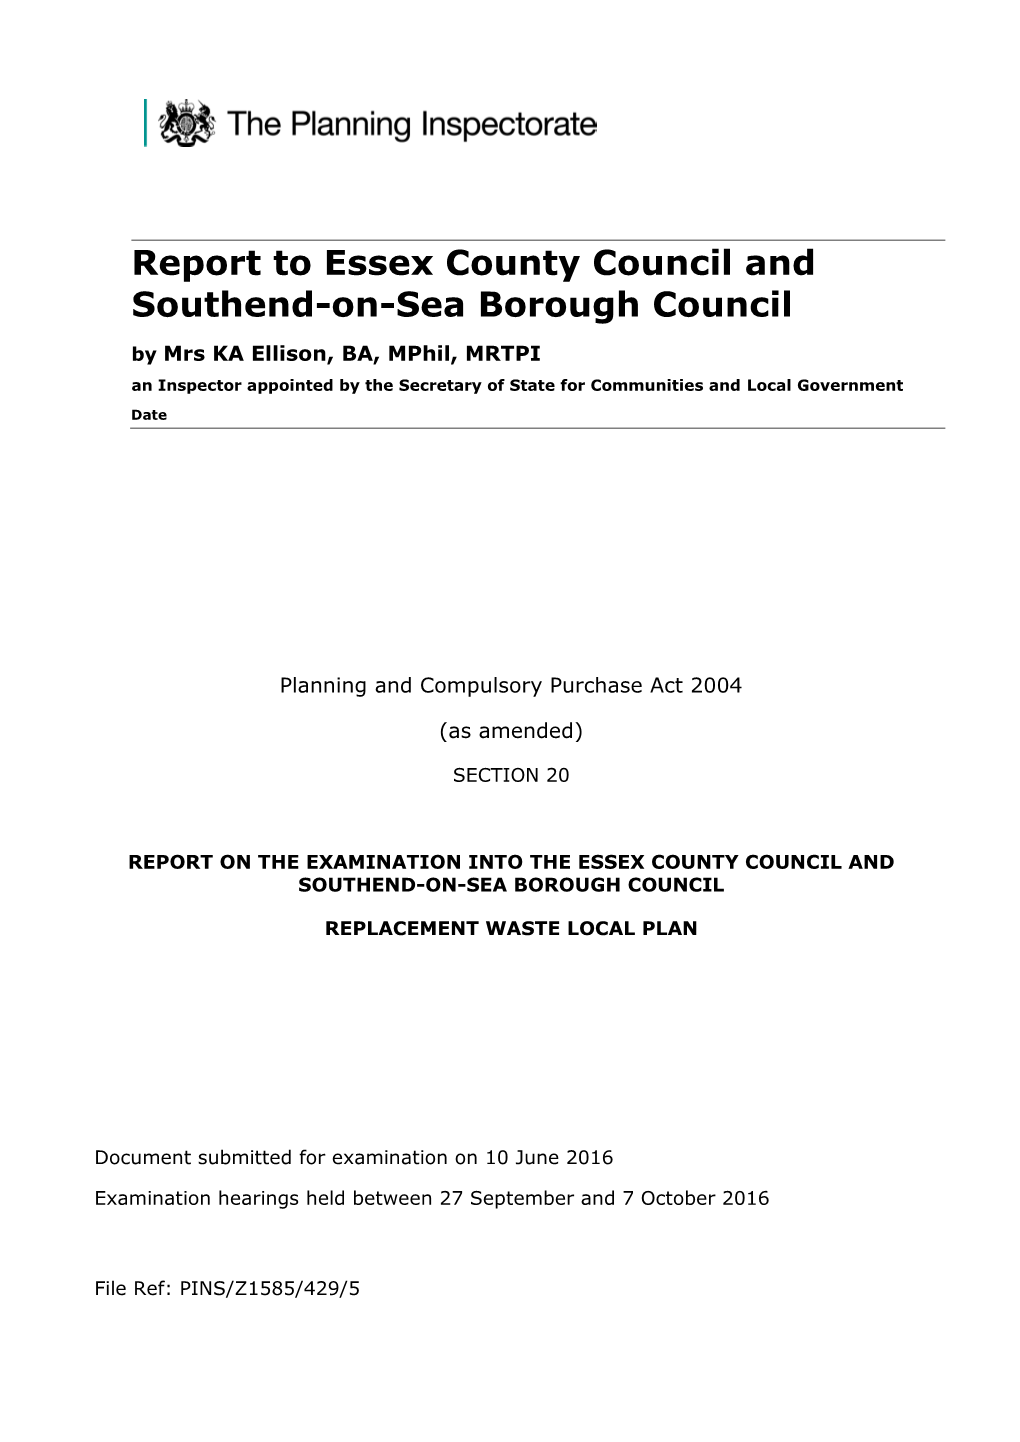 Report to Essex County Council and Southend-On-Sea Borough Council